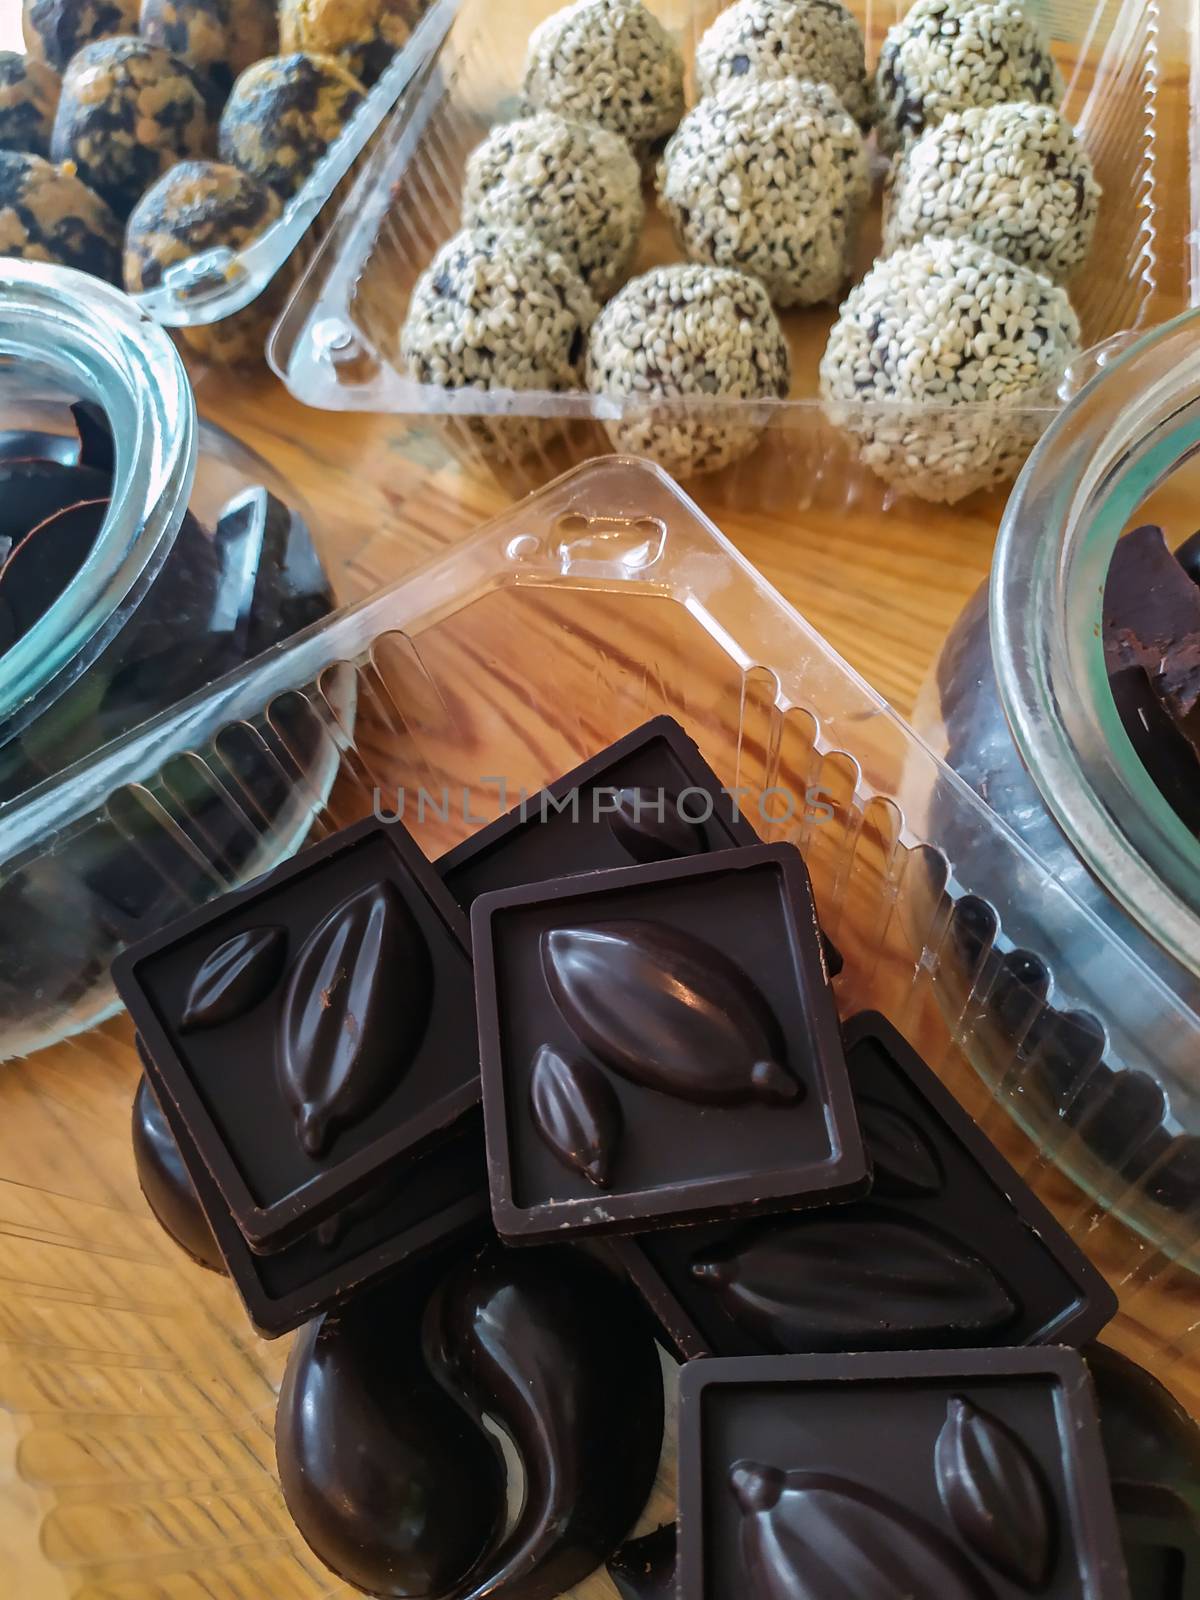 Selection of handmade chocolates. Chocolate is one of the most popular holiday gifts. On Valentine's Day, a box of chocolates is traditional, usually presented with flowers and greeting card.